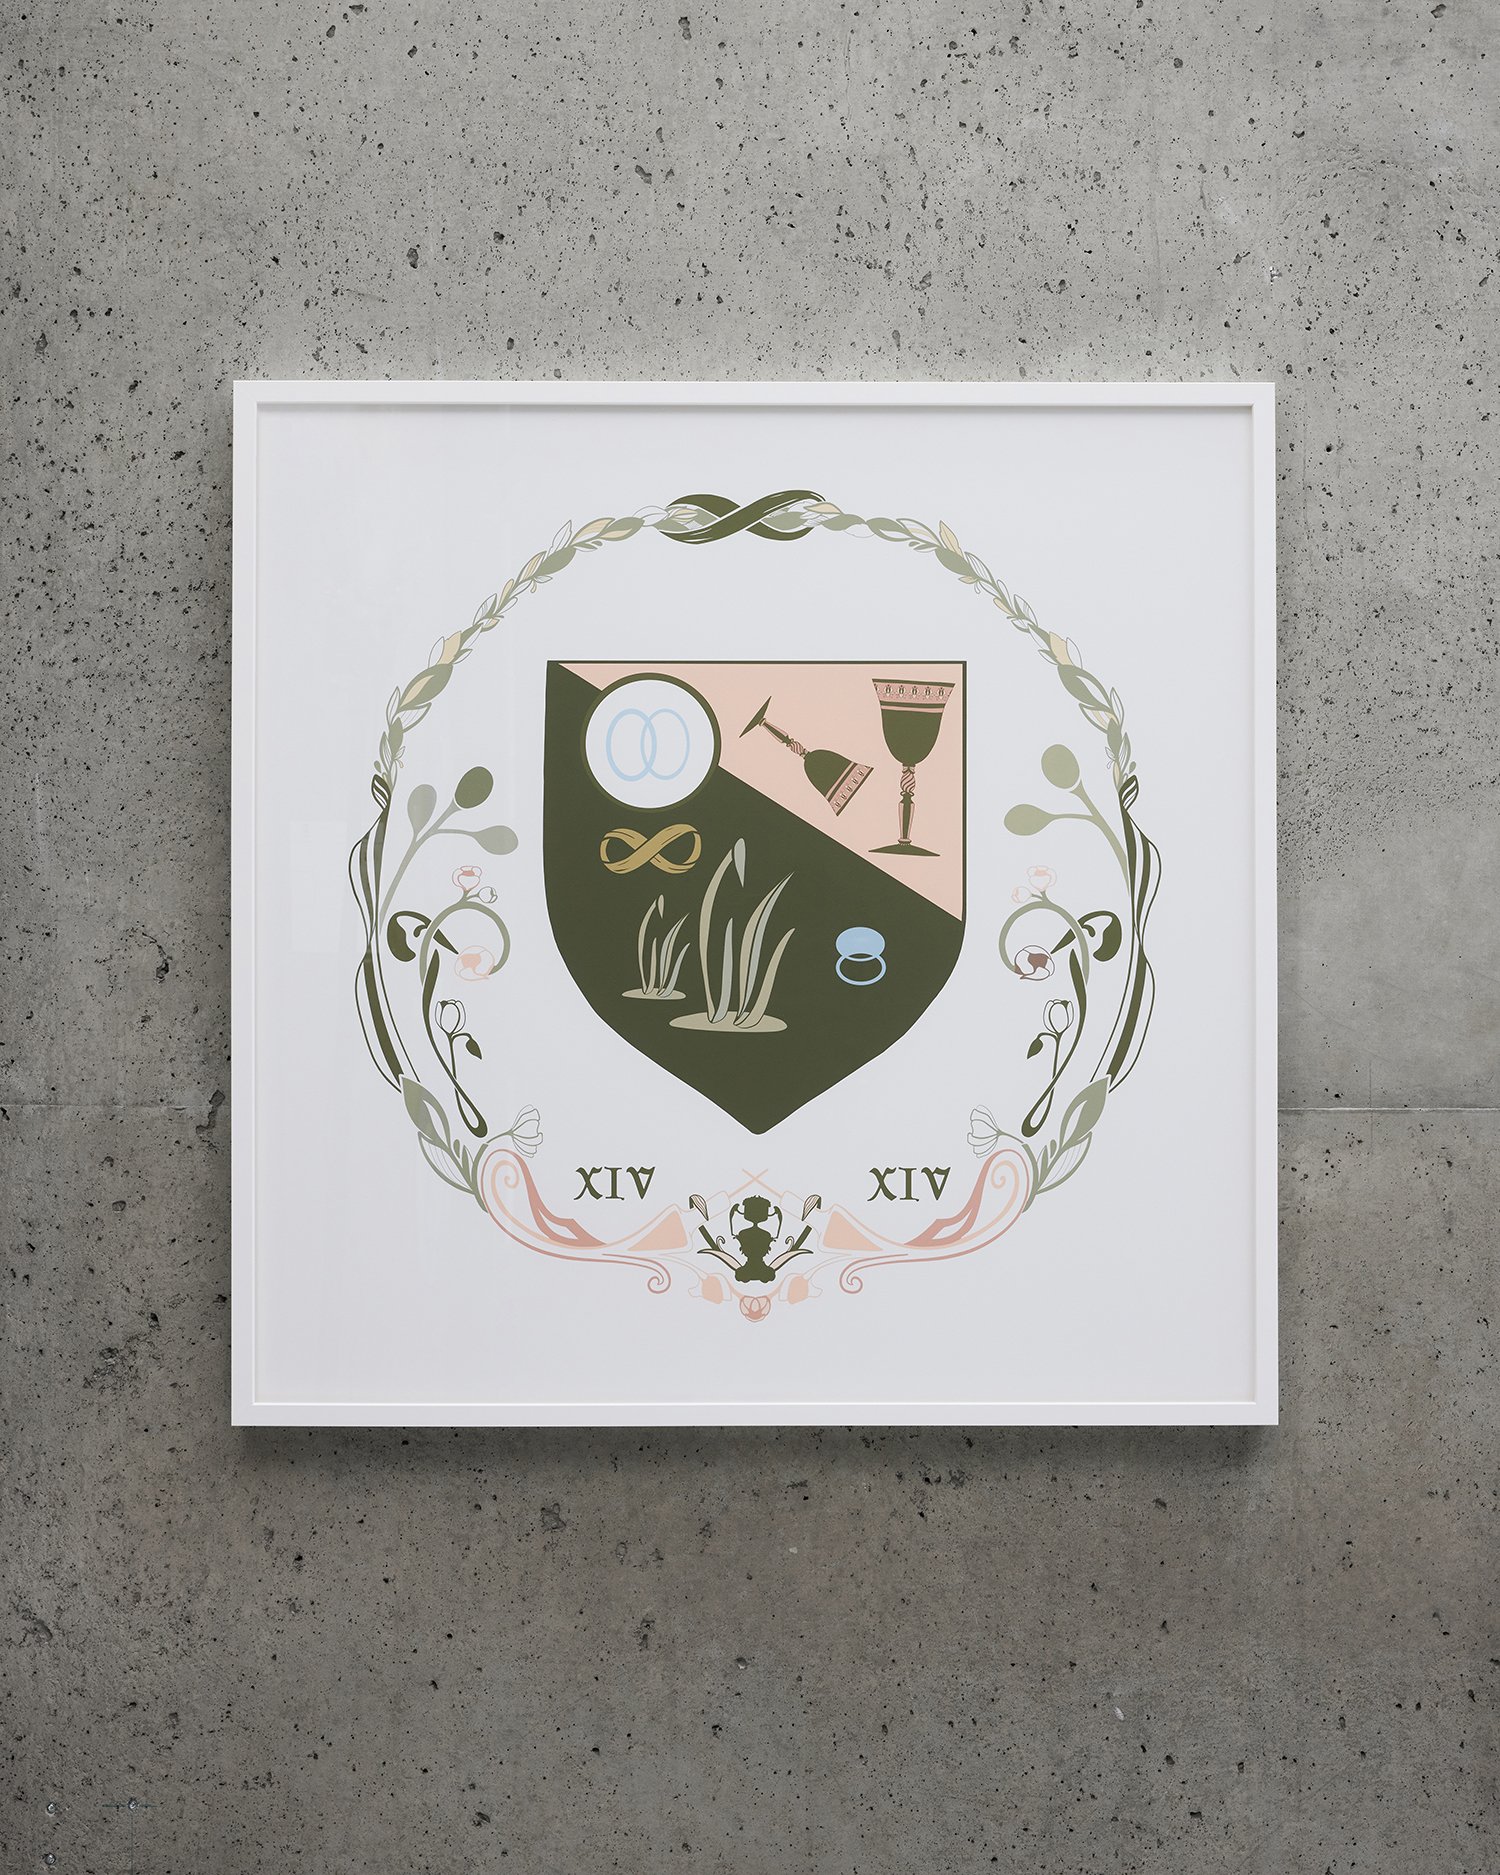   The Crest of the Players,  36 X 36 inches,  Framed Print, Digital Drawing on Archival Paper.  